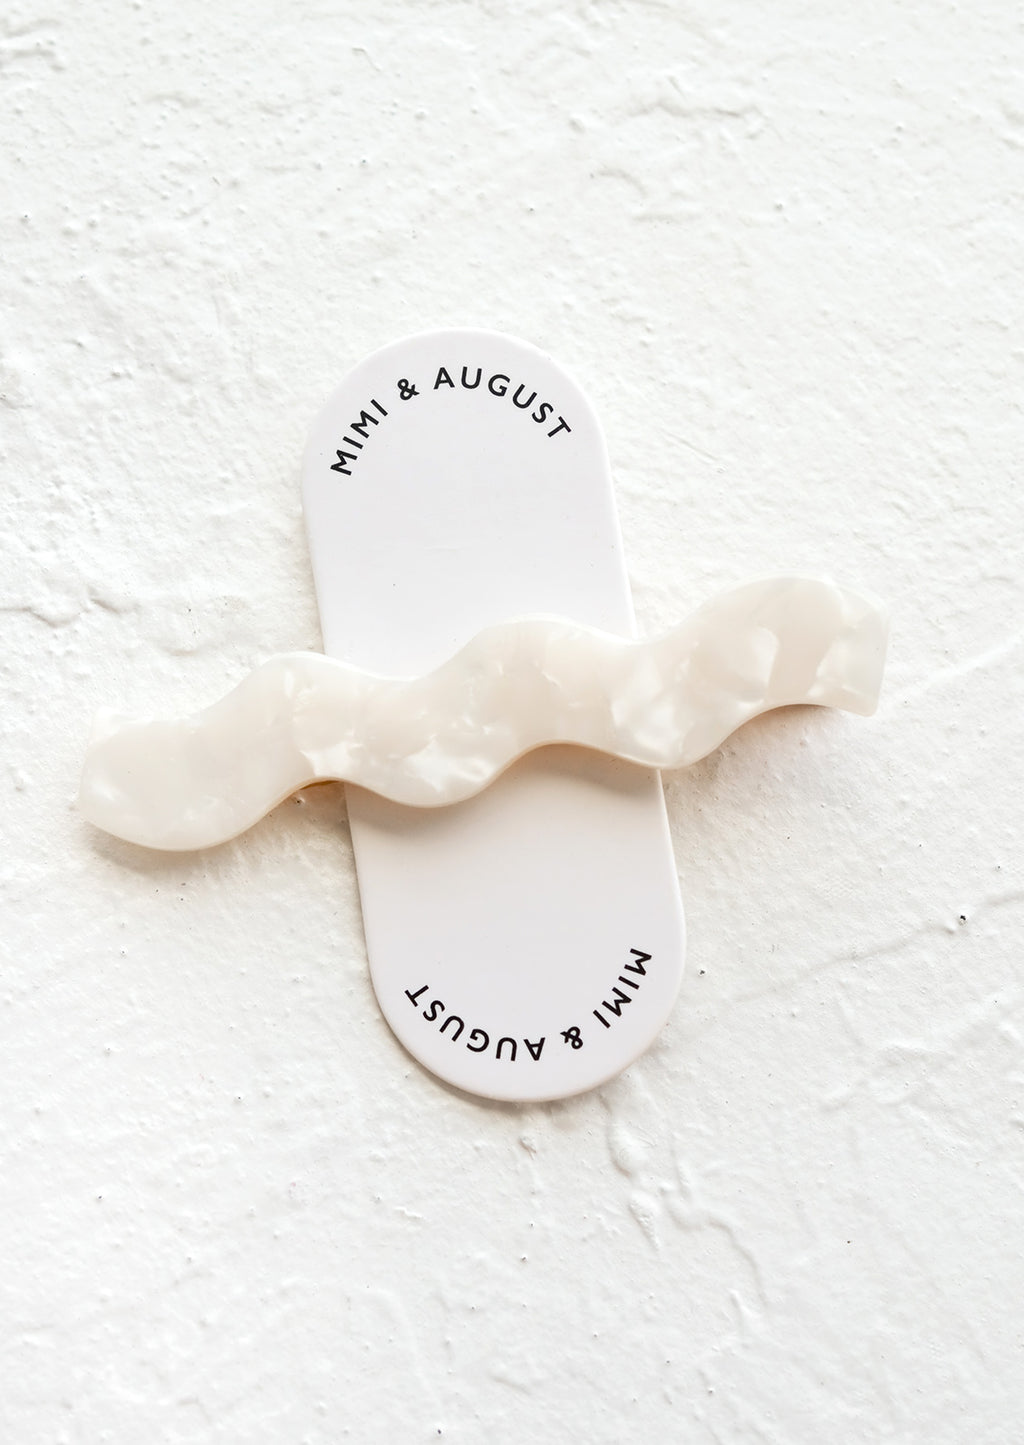 Pearl: White pearl hair clip with wavy squiggle shape.